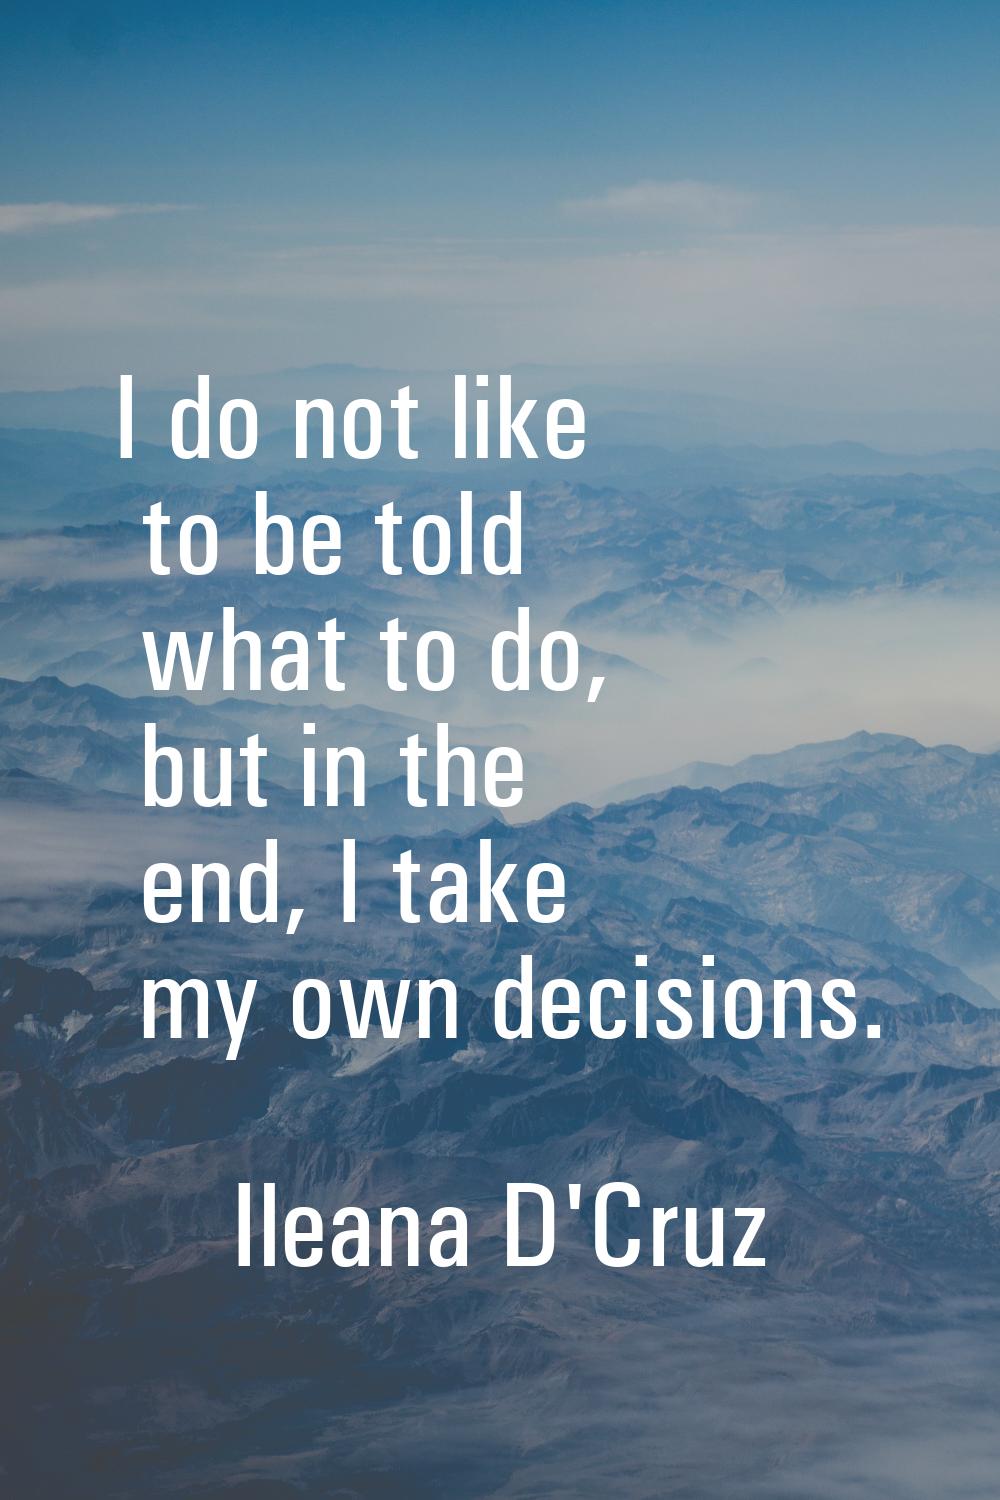 I do not like to be told what to do, but in the end, I take my own decisions.